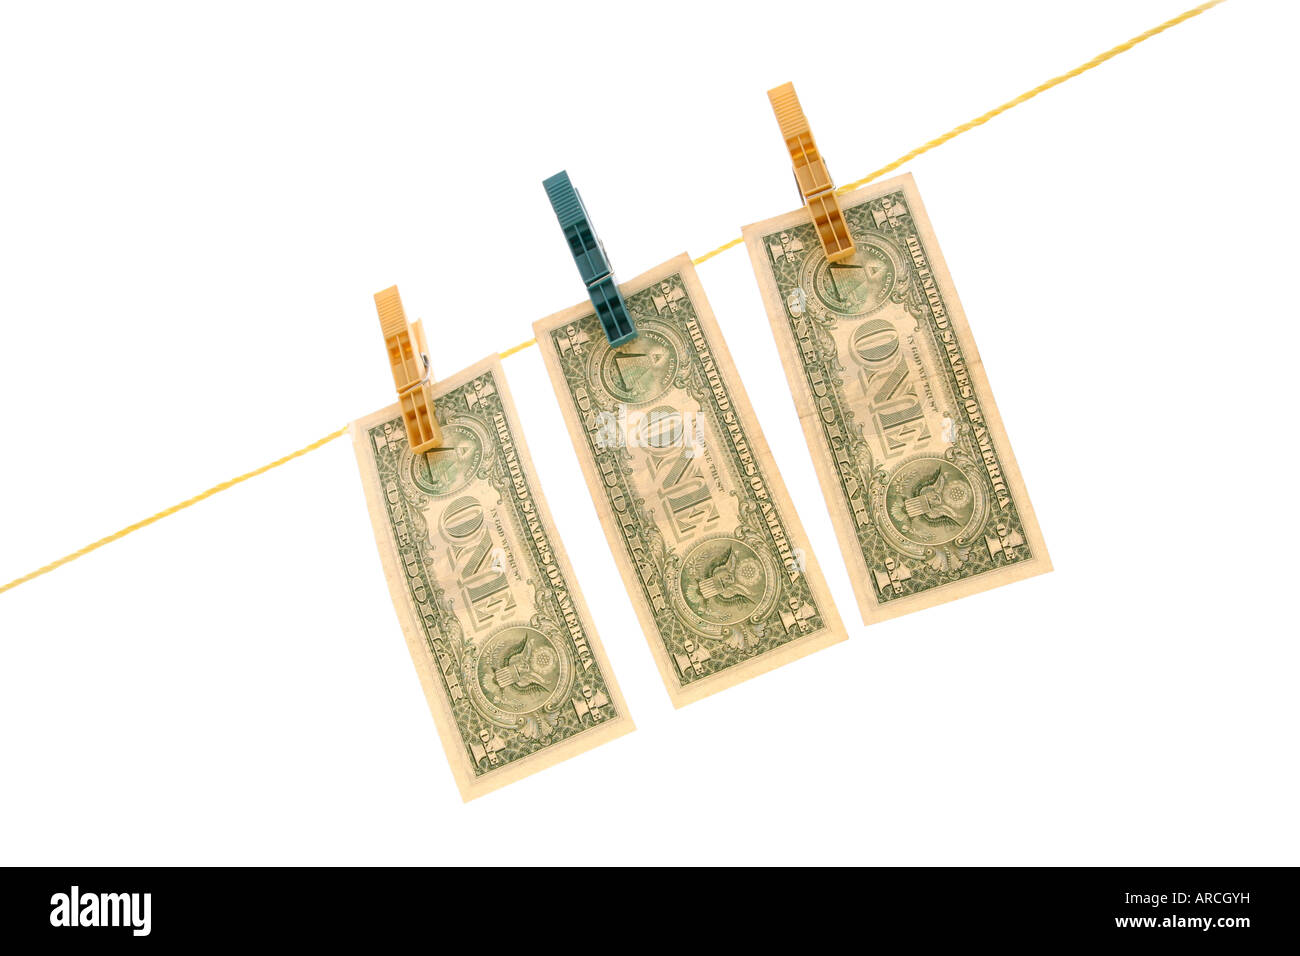 dollars on a clothesline; isolated on white background Stock Photo